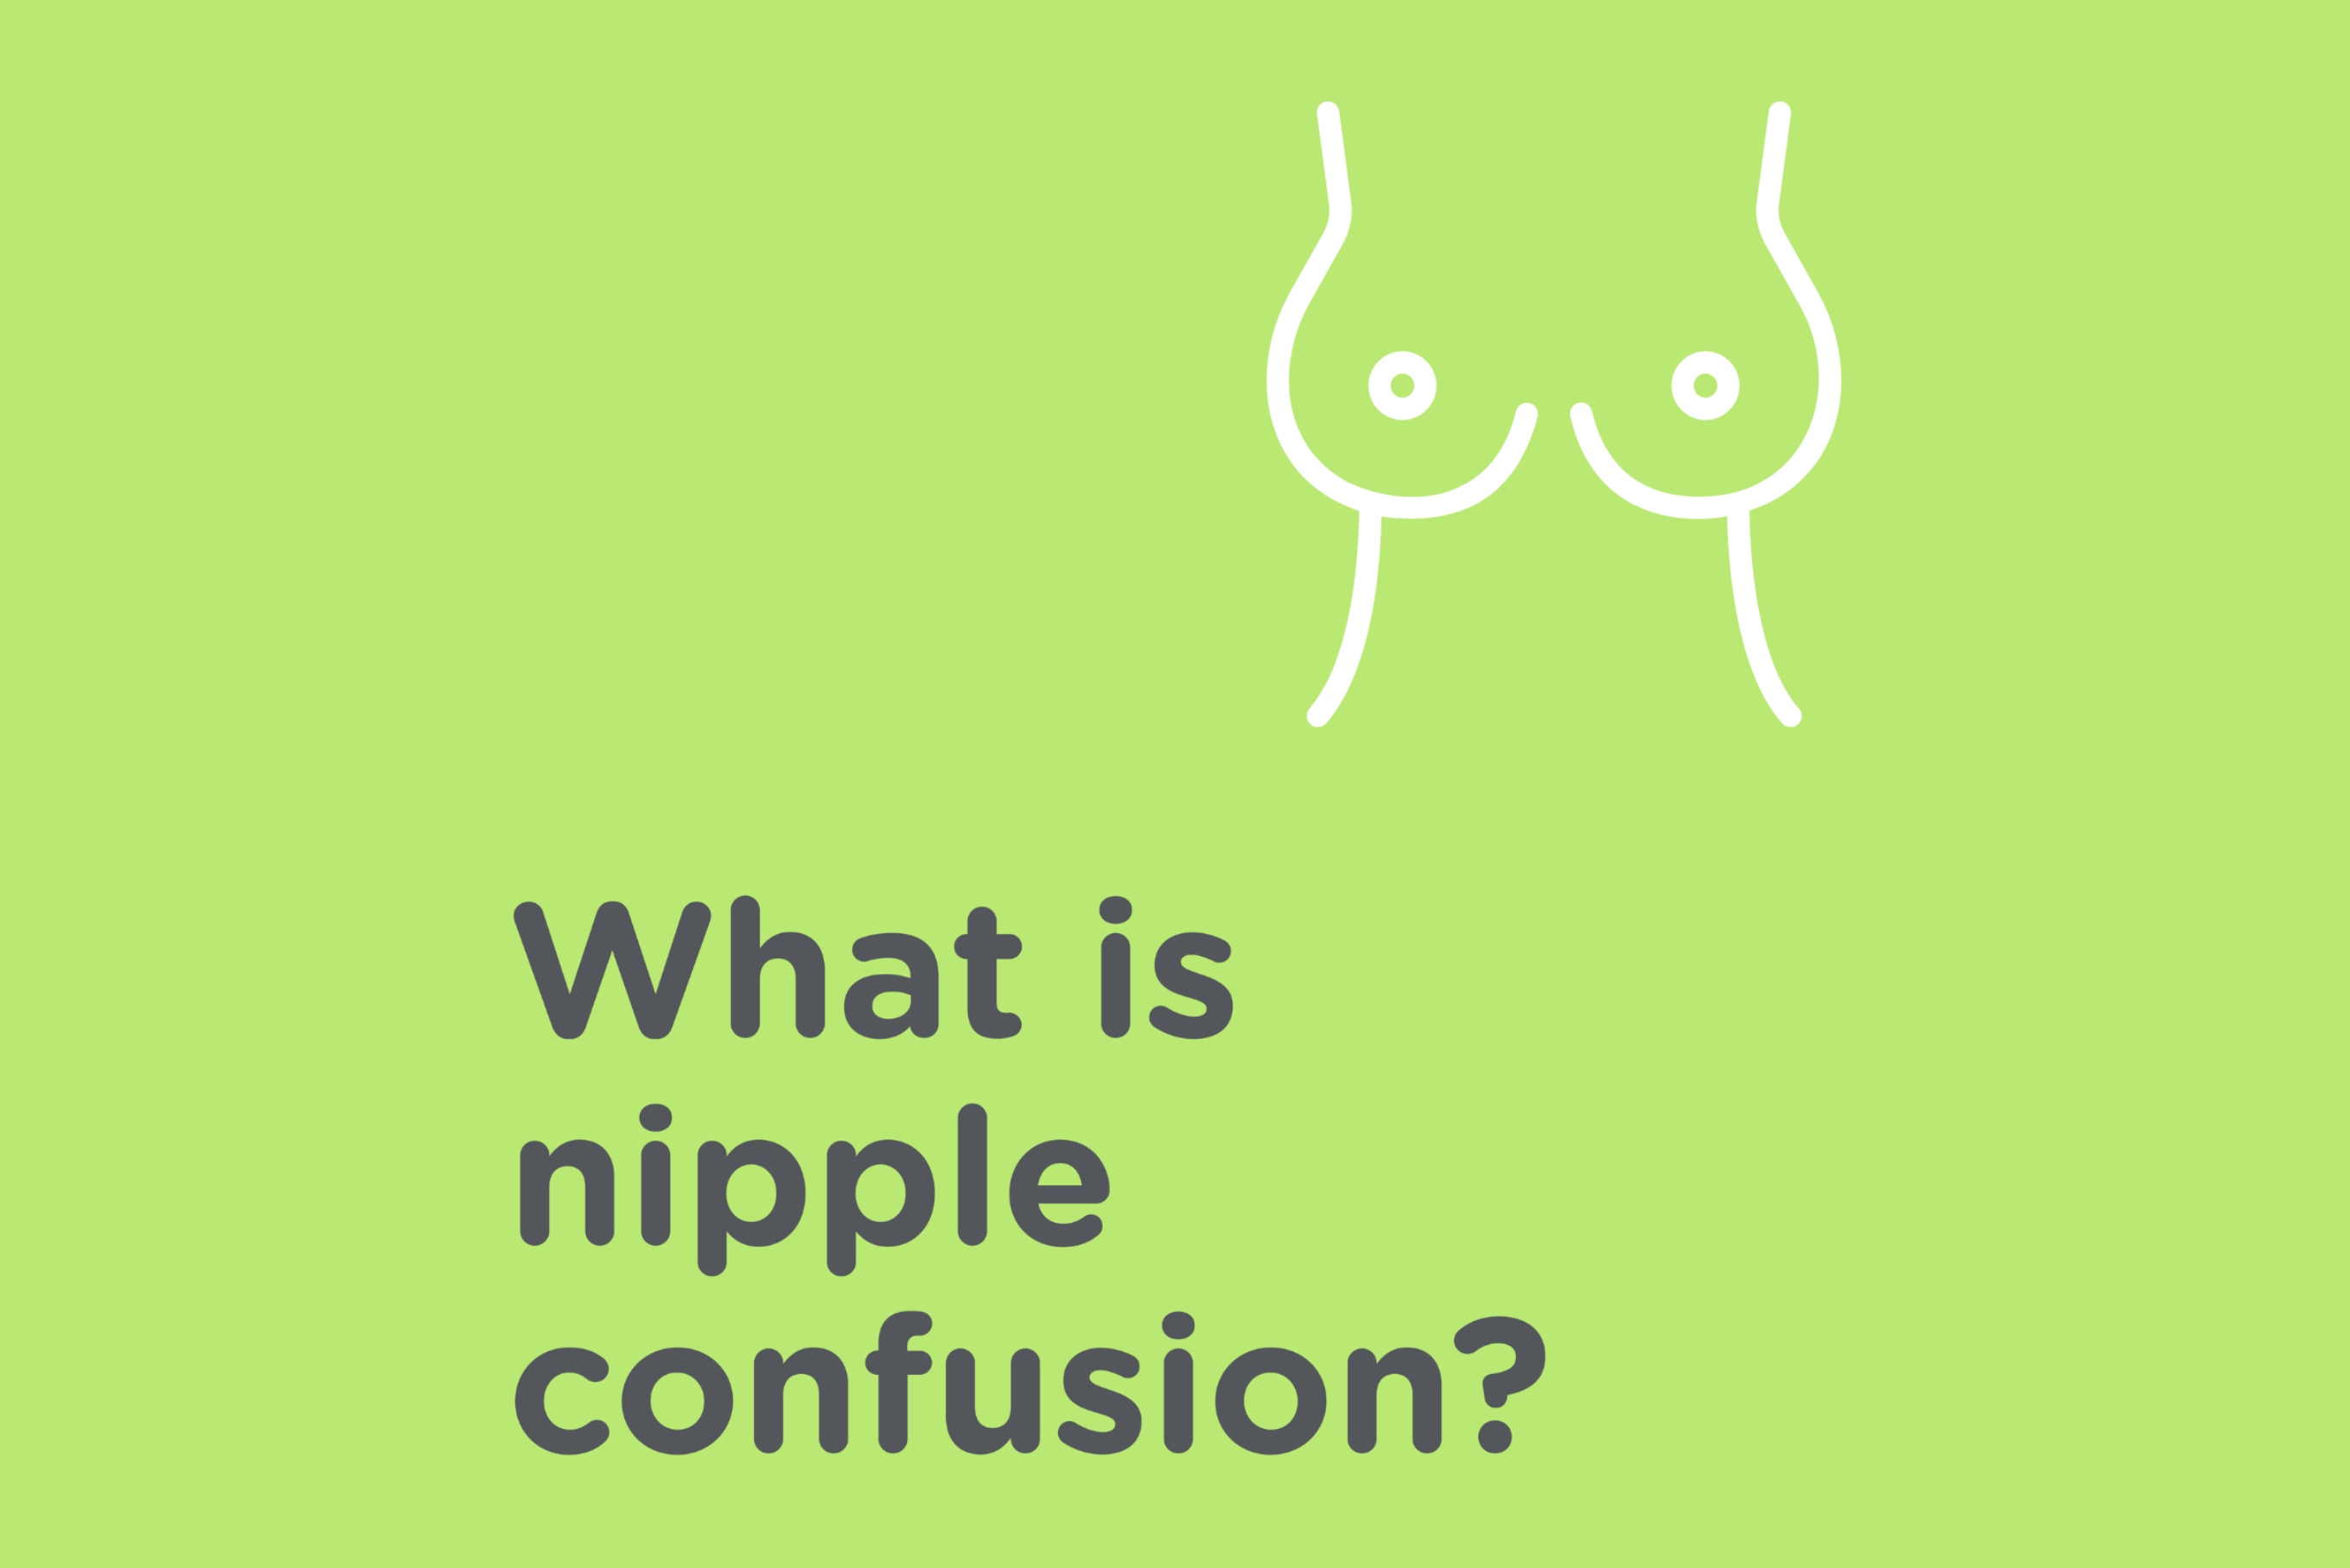 What is nipple confusion?